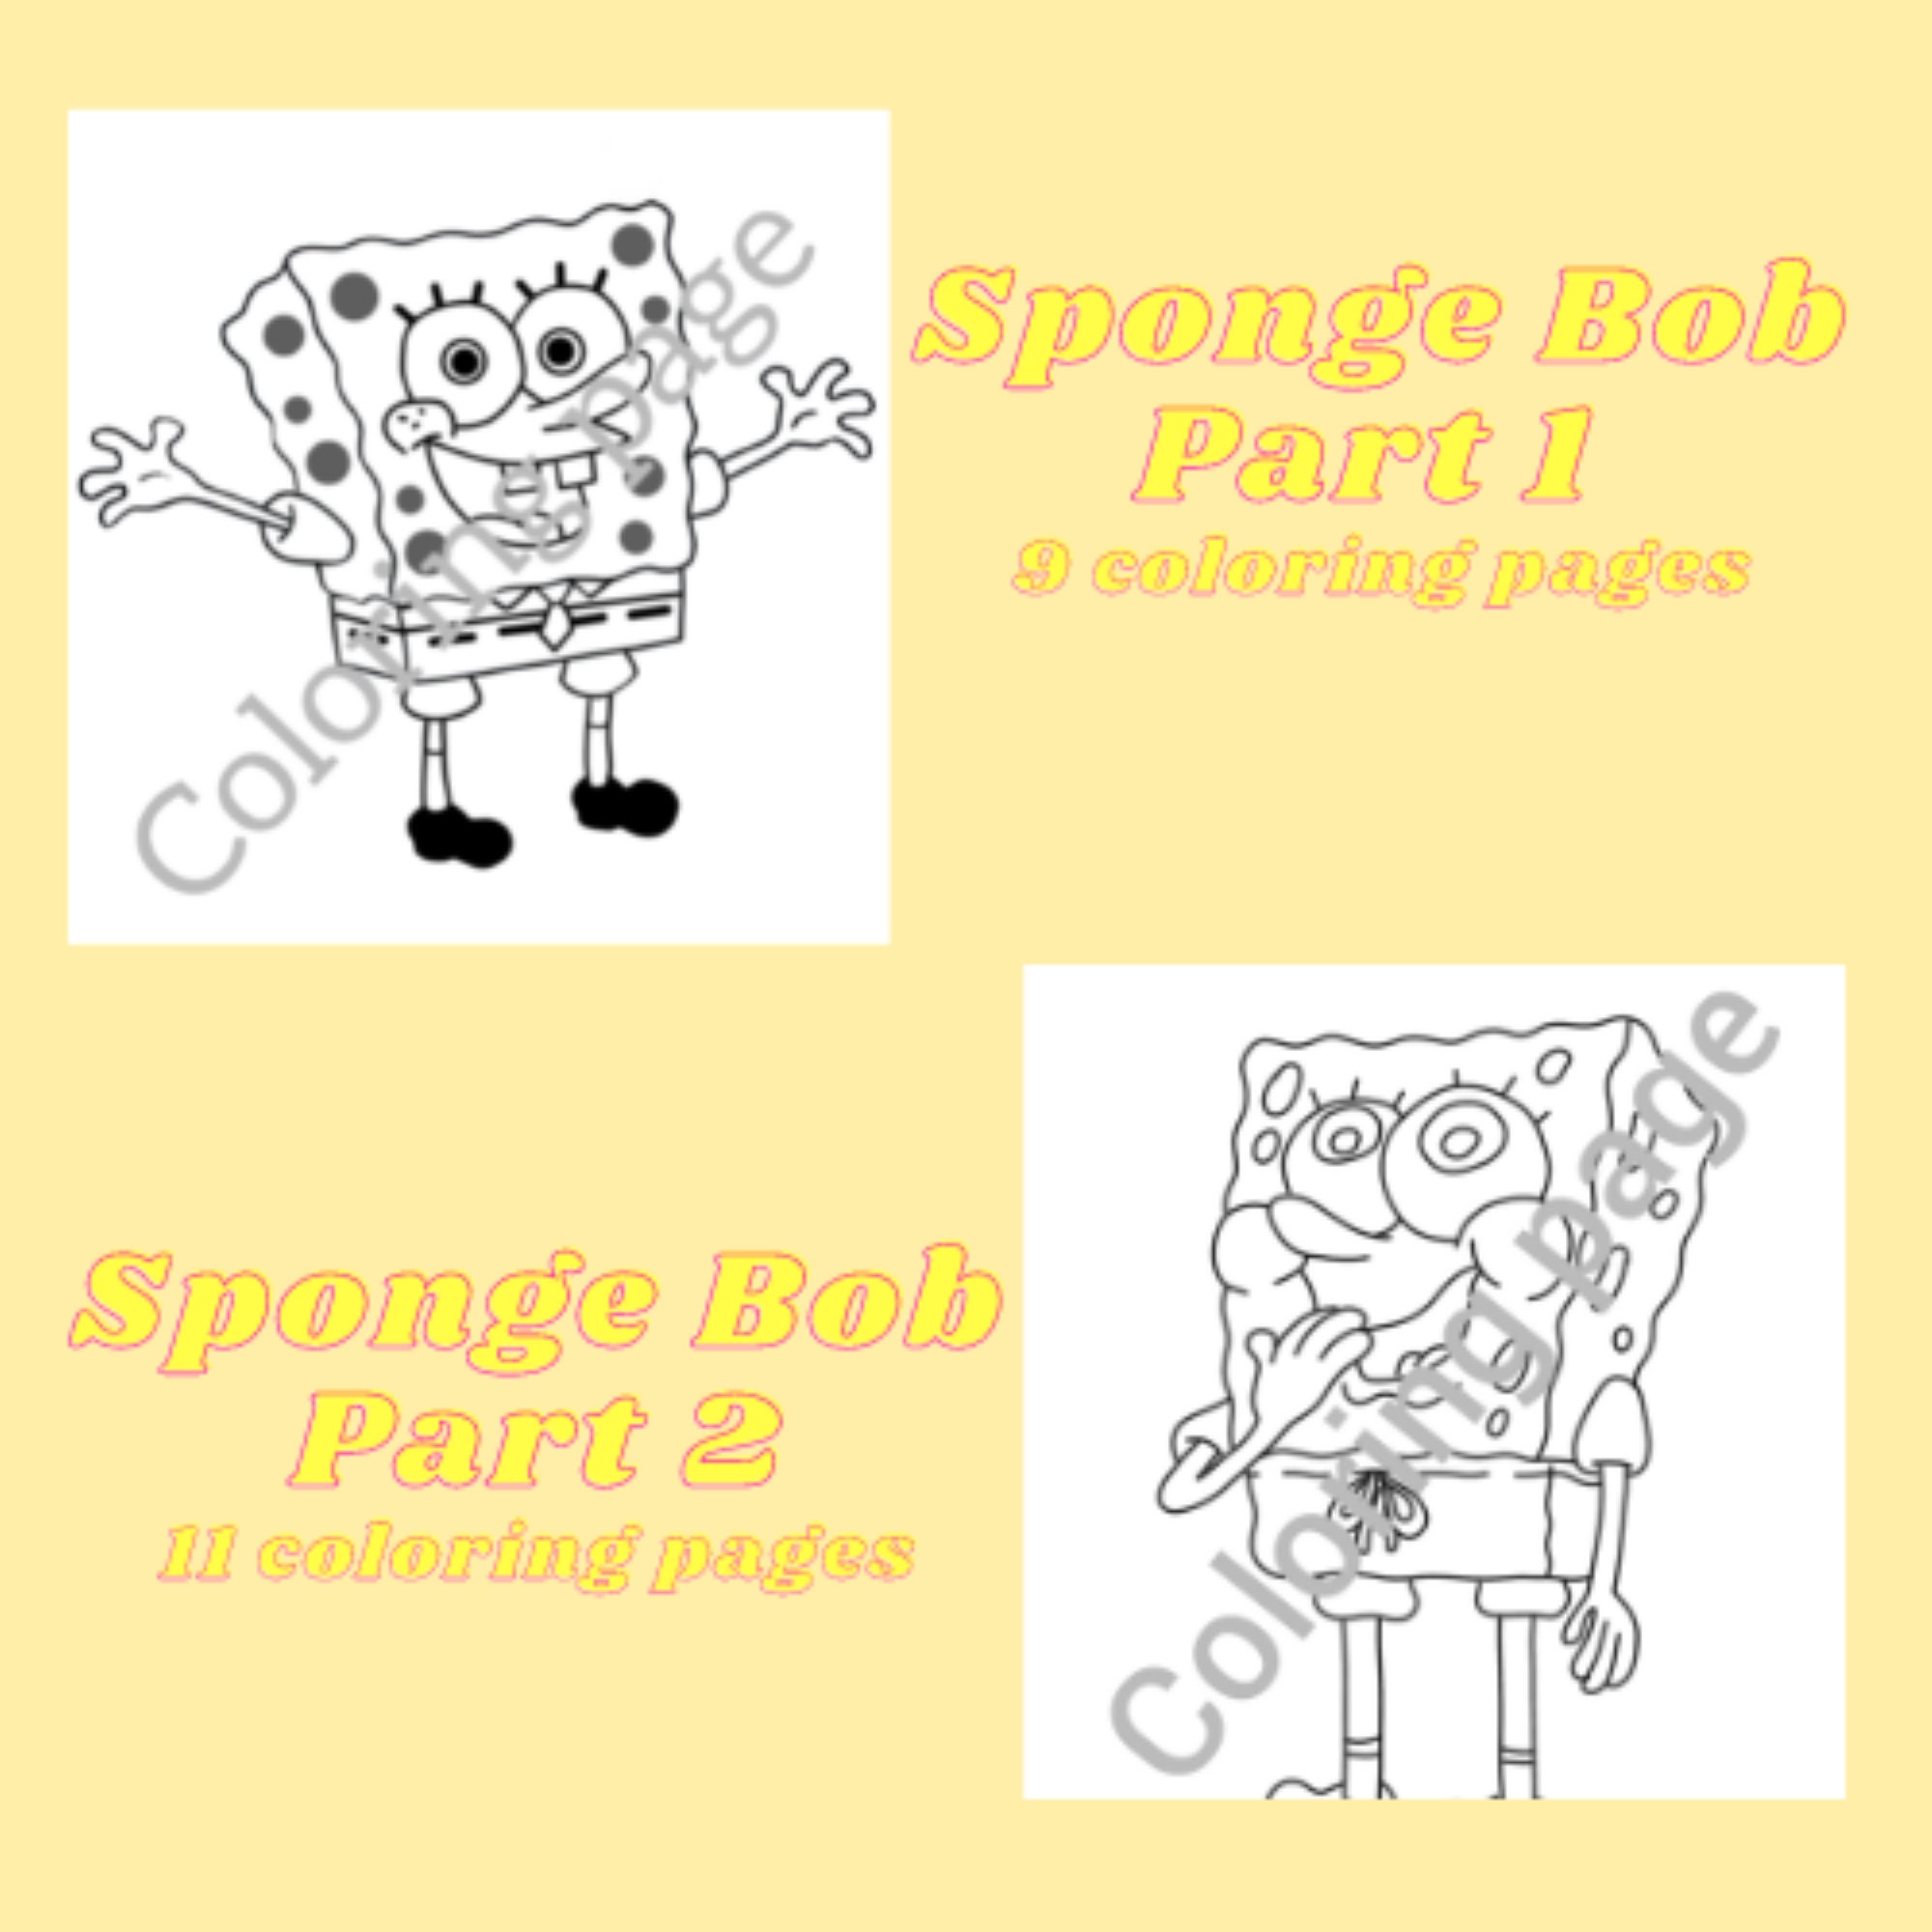 spongebob squarepants coloring pages in grayscale